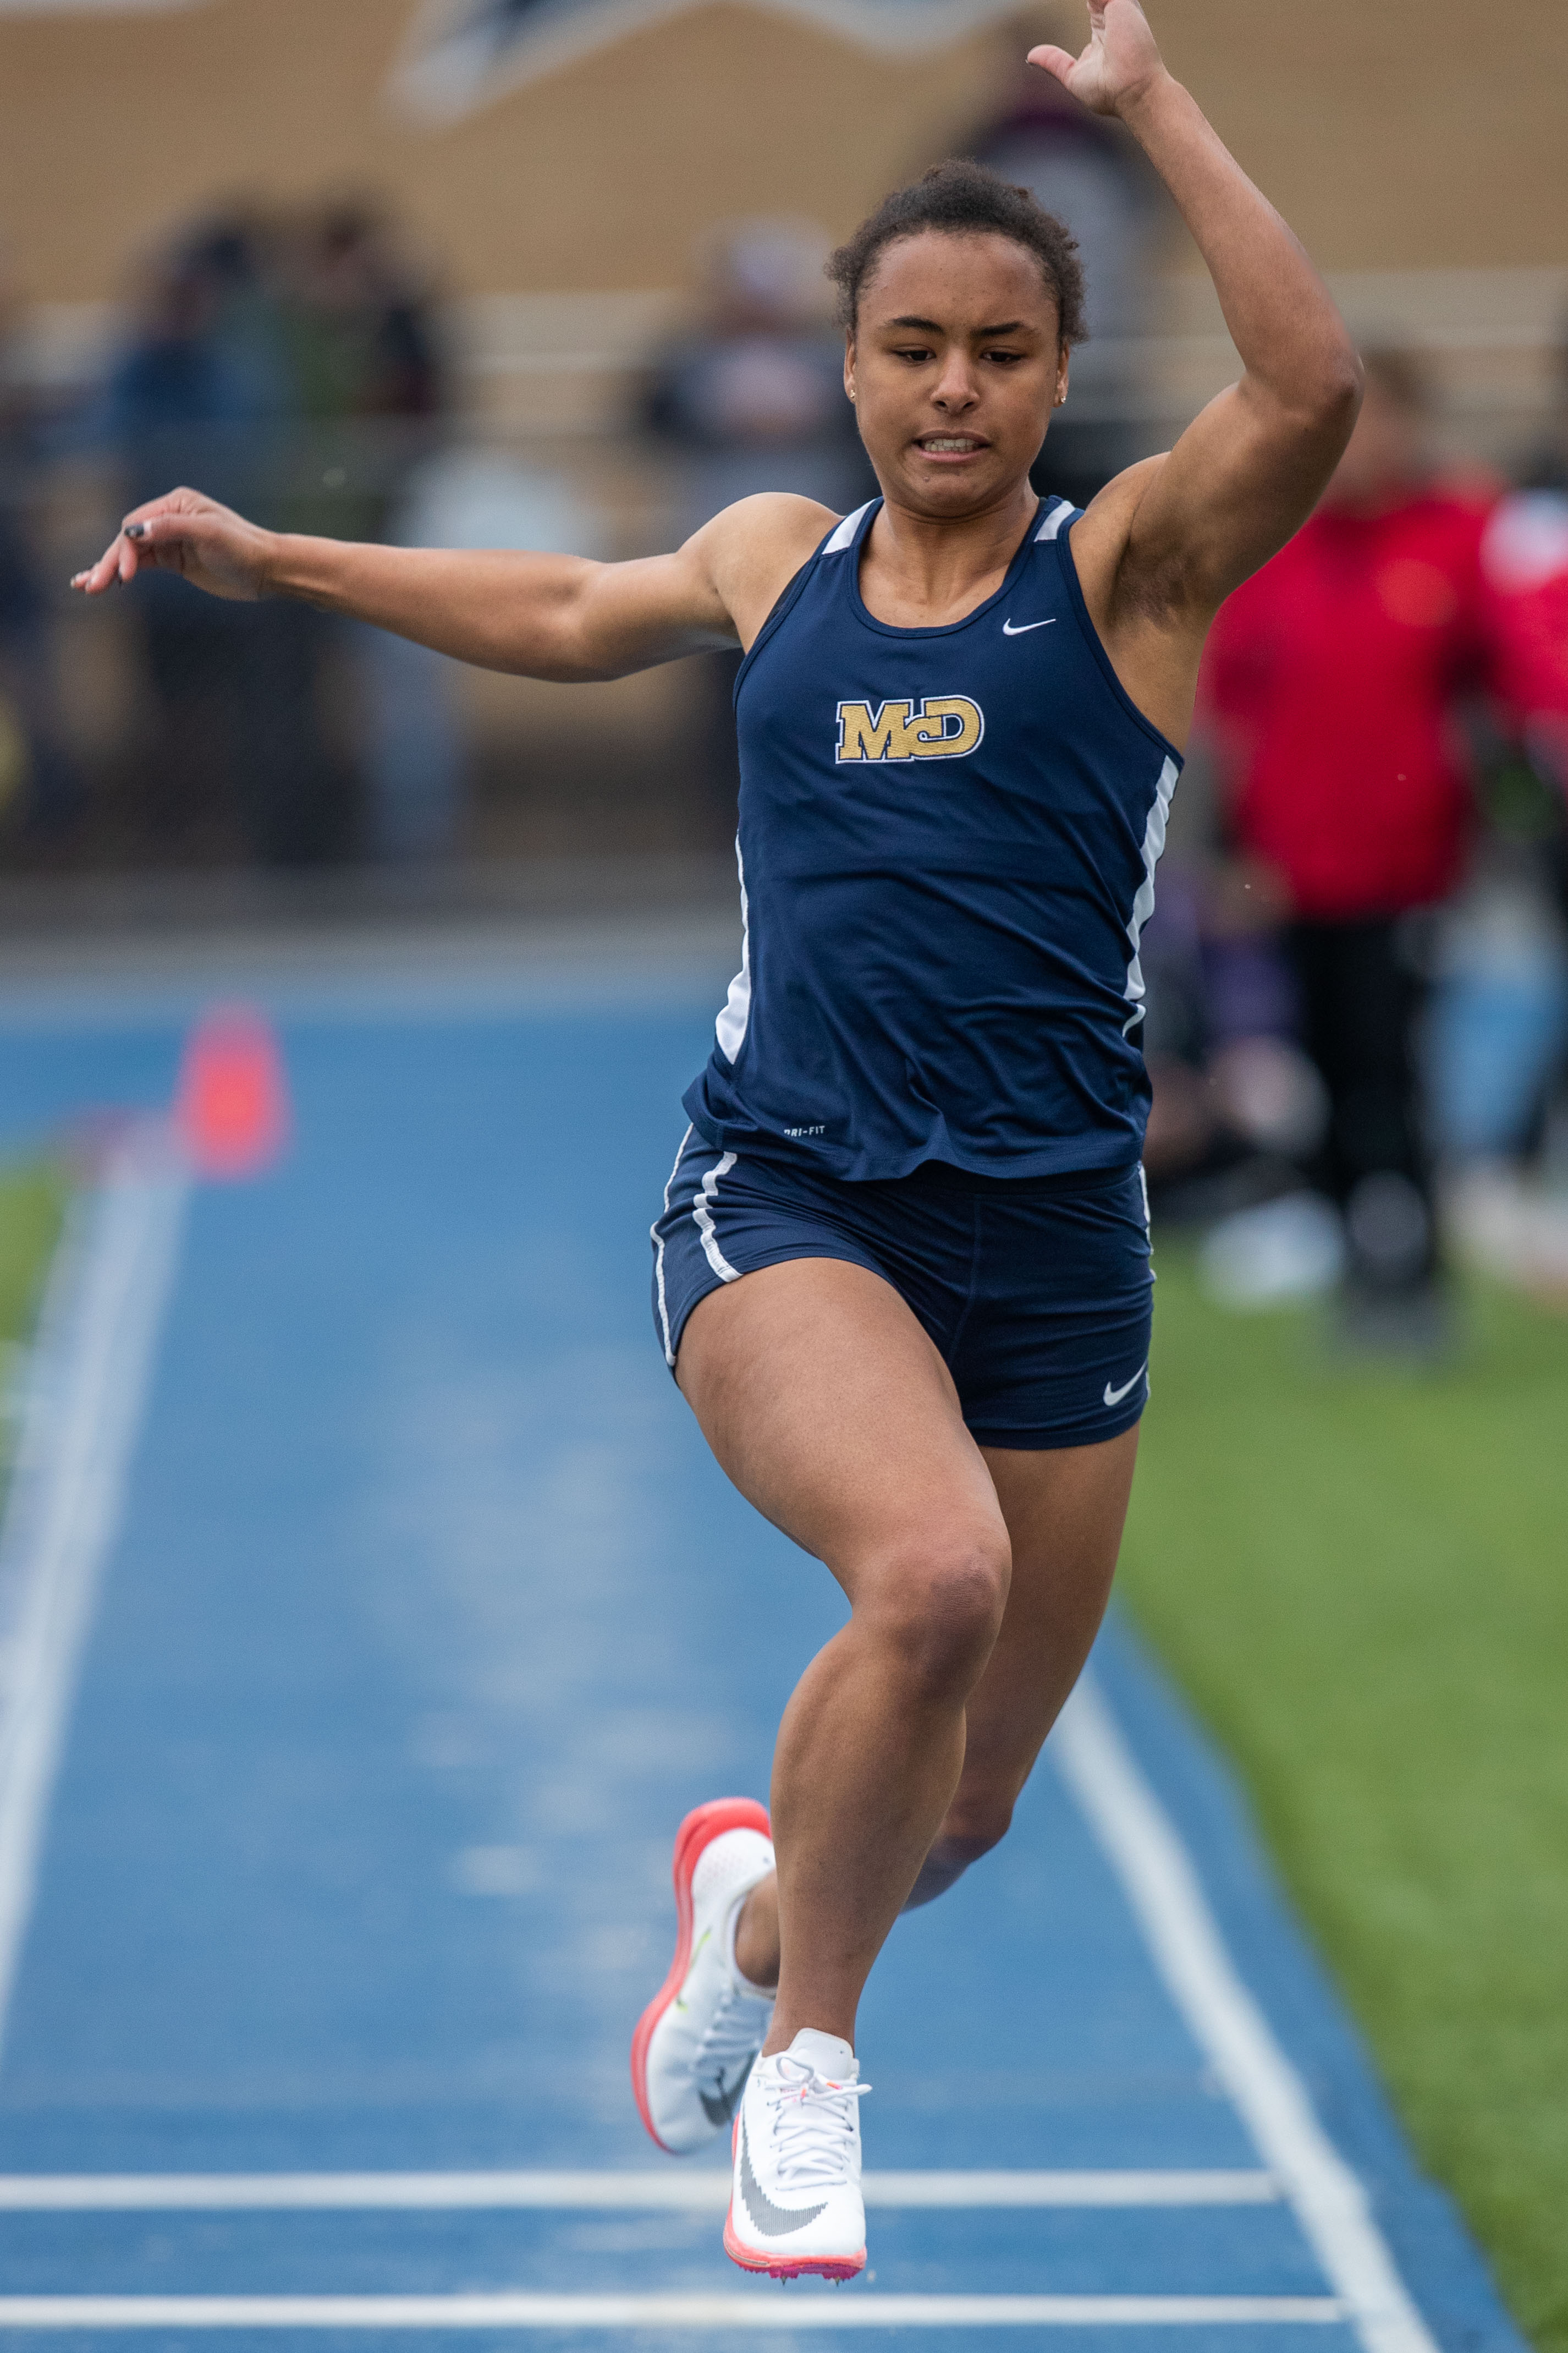 Maddy Brooks, Bishop McDevitt, wins the Triple Jump, with a best of 34-2.50, at the 2023 Tim Cook Memorial Invitational track & field meet at Chambersburg, Pa., Mar. 25, 2023.Mark Pynes | pennlive.com